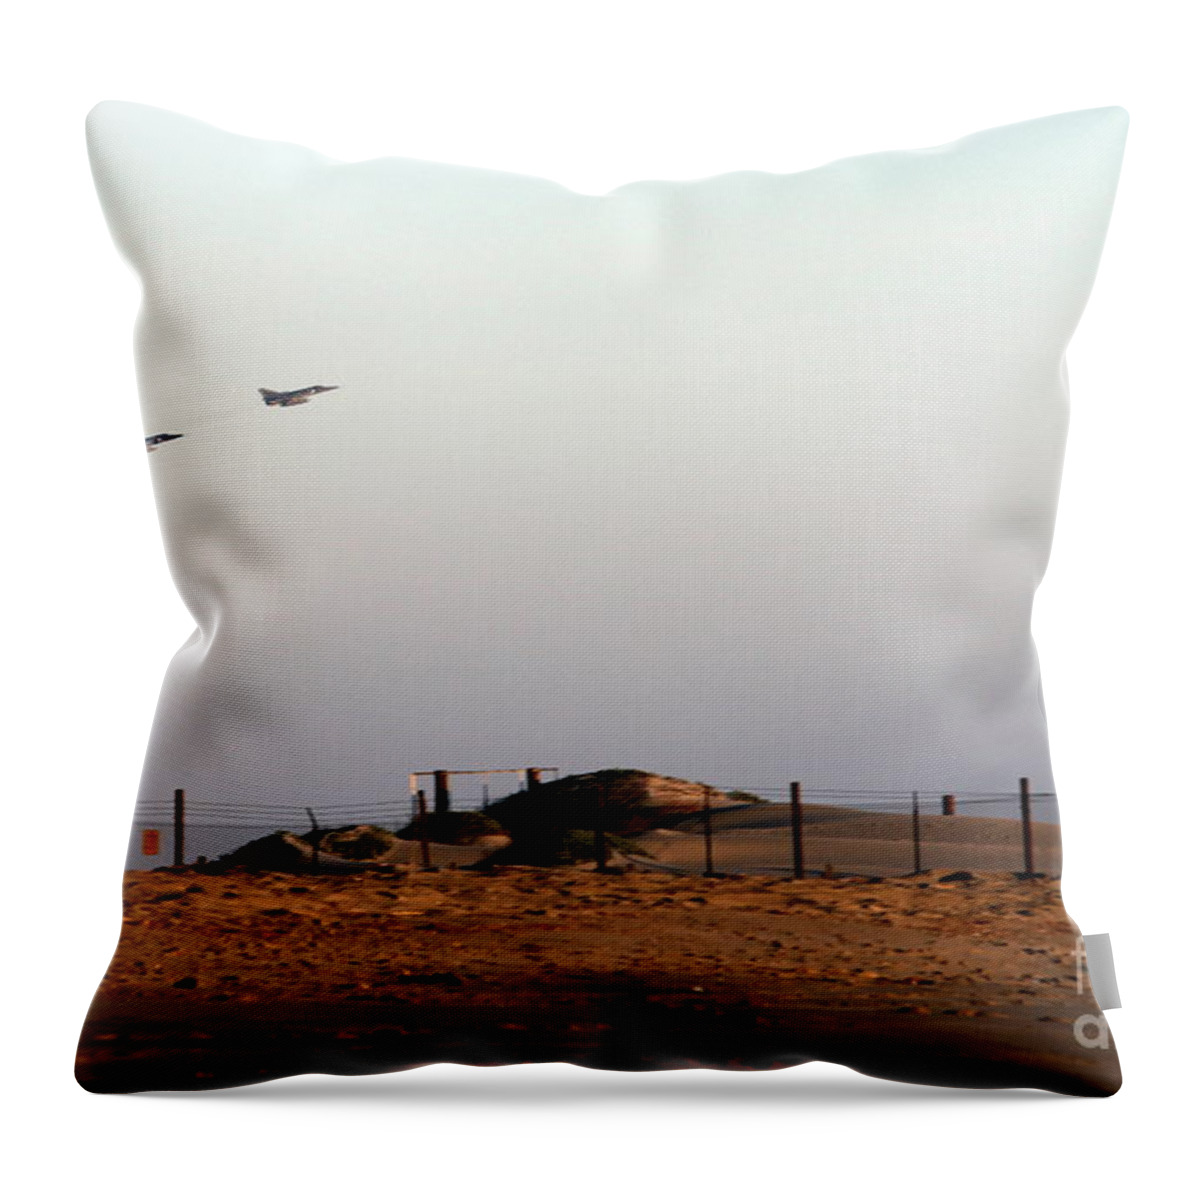 Usa Throw Pillow featuring the photograph Takeoff by Henrik Lehnerer